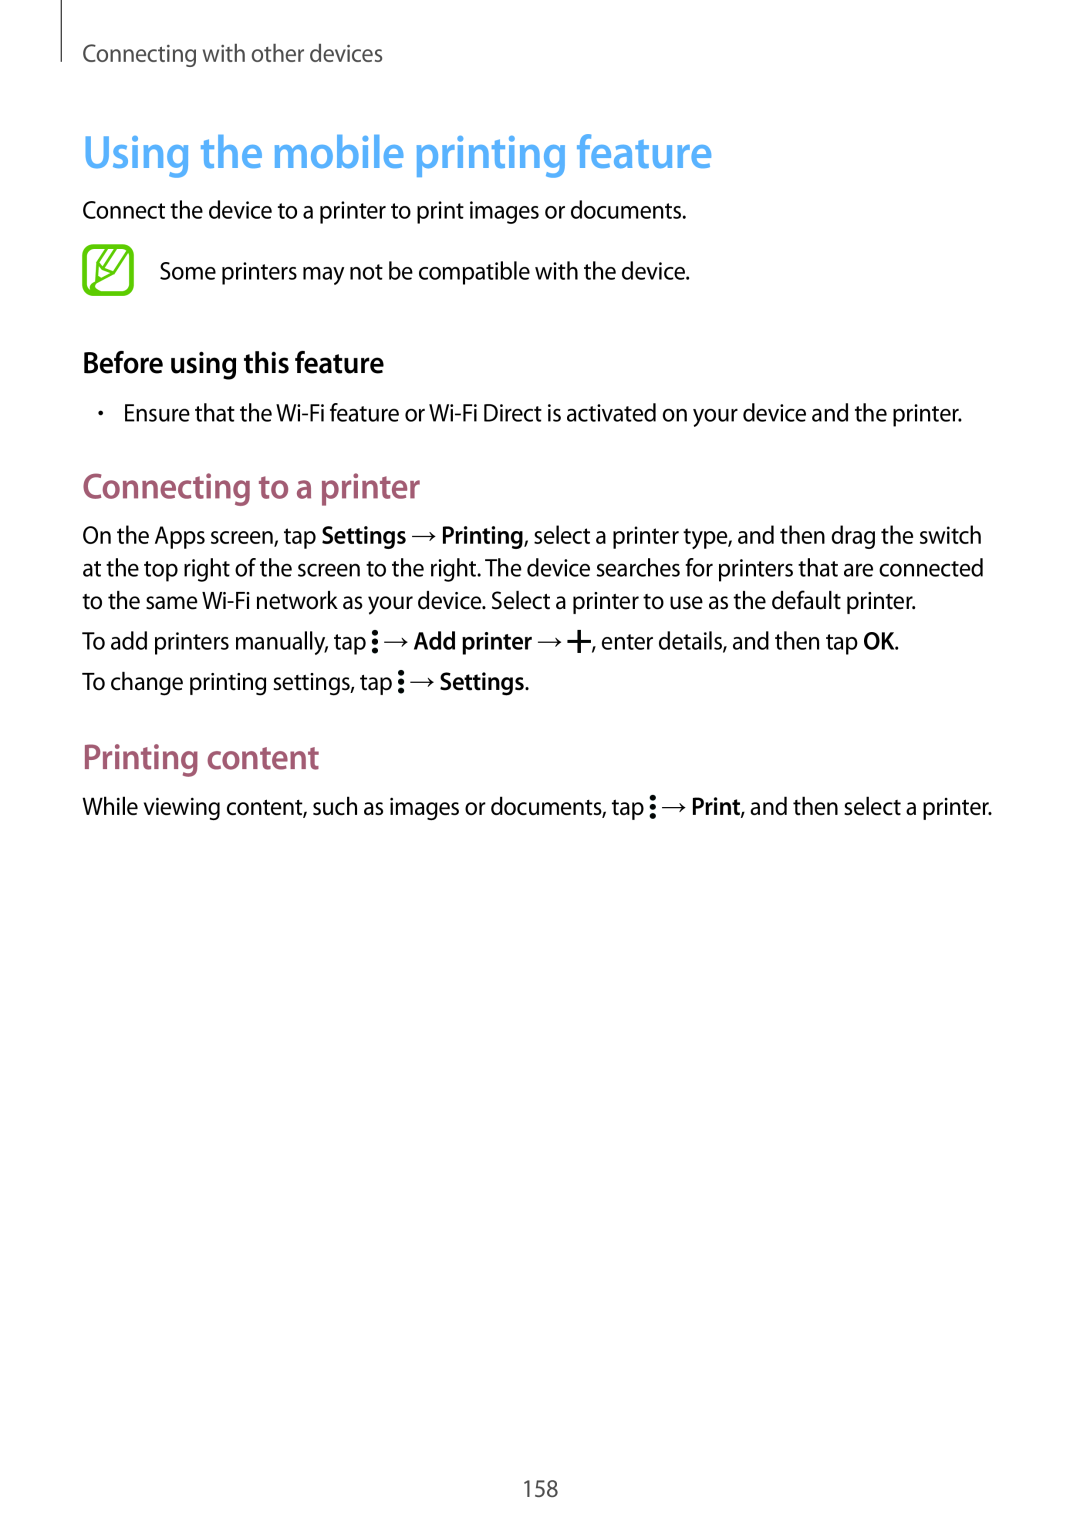 Samsung SM-G901FZBAFTM, SM-G901FZKACOS manual Using the mobile printing feature, Connecting to a printer, Printing content 